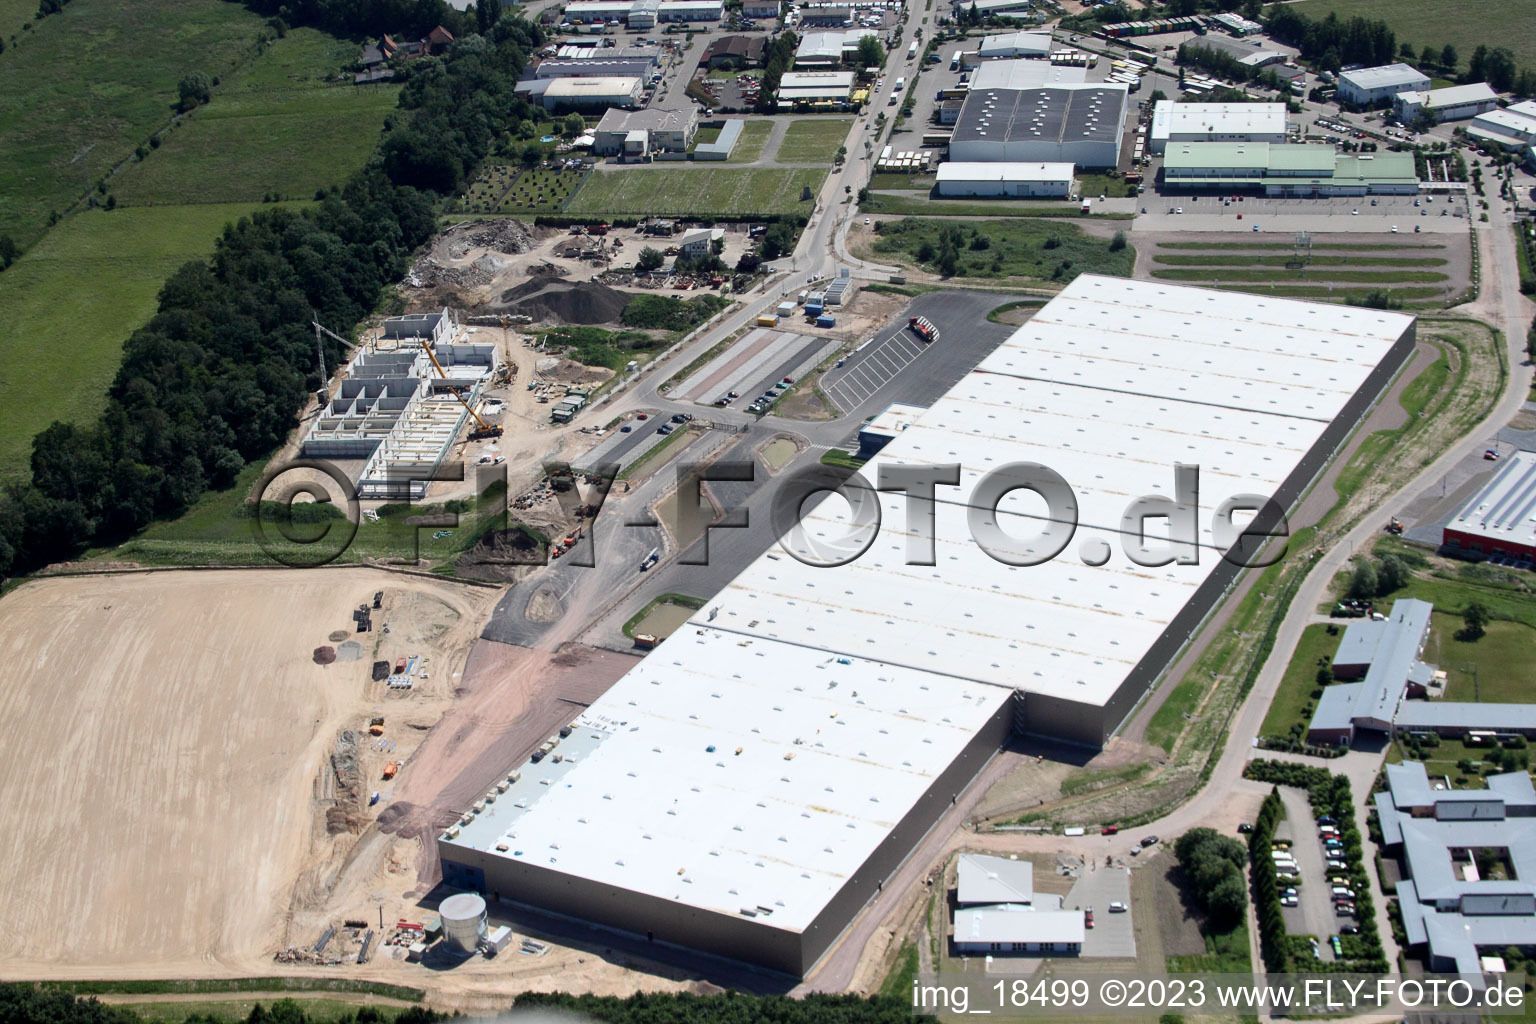 Coincidence logistics center in the district Minderslachen in Kandel in the state Rhineland-Palatinate, Germany from above